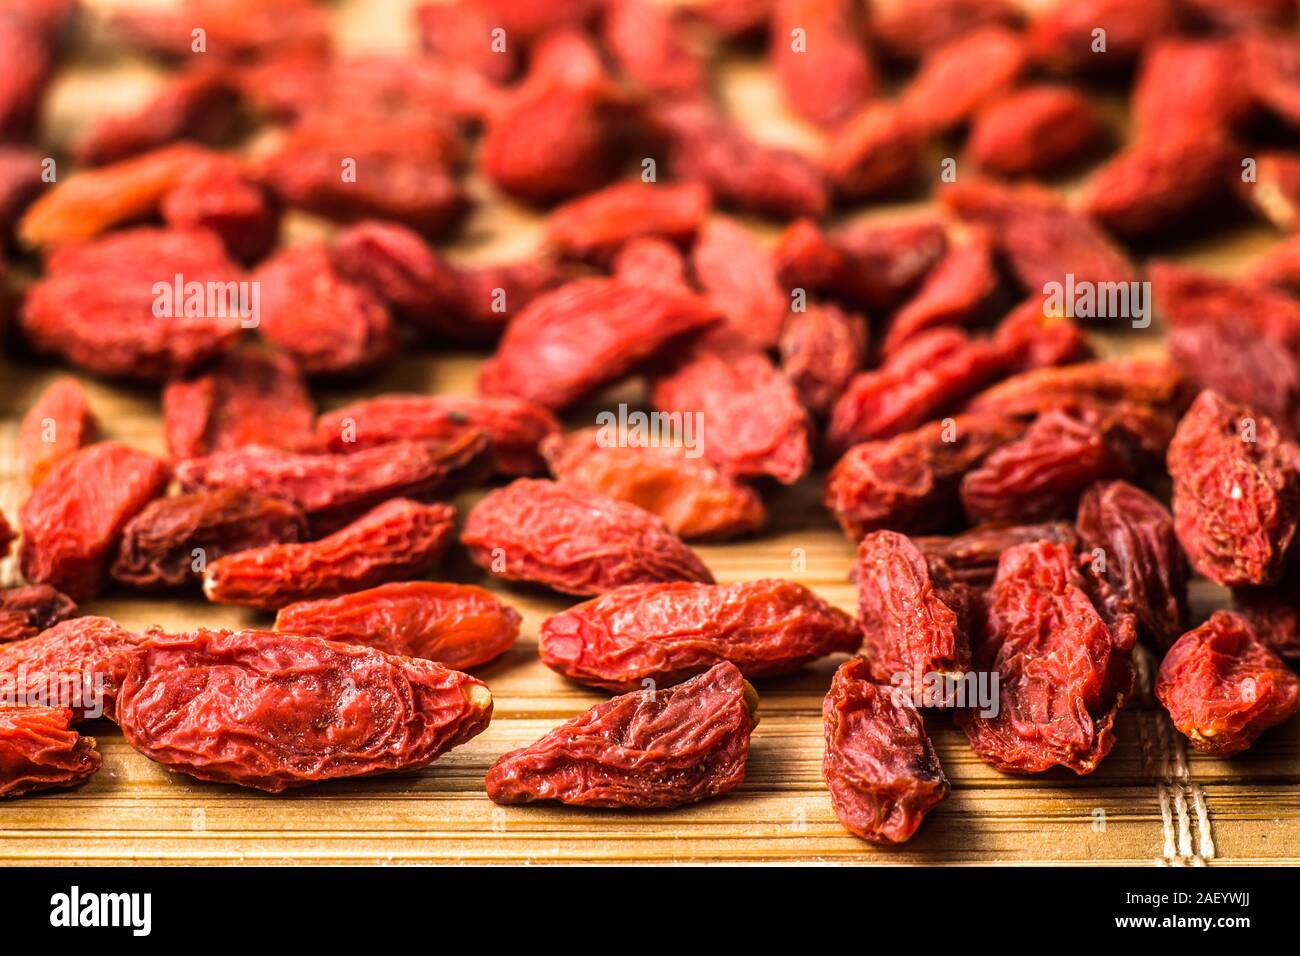 Goji berries background. Healthy food, superfood concept. Stock Photo